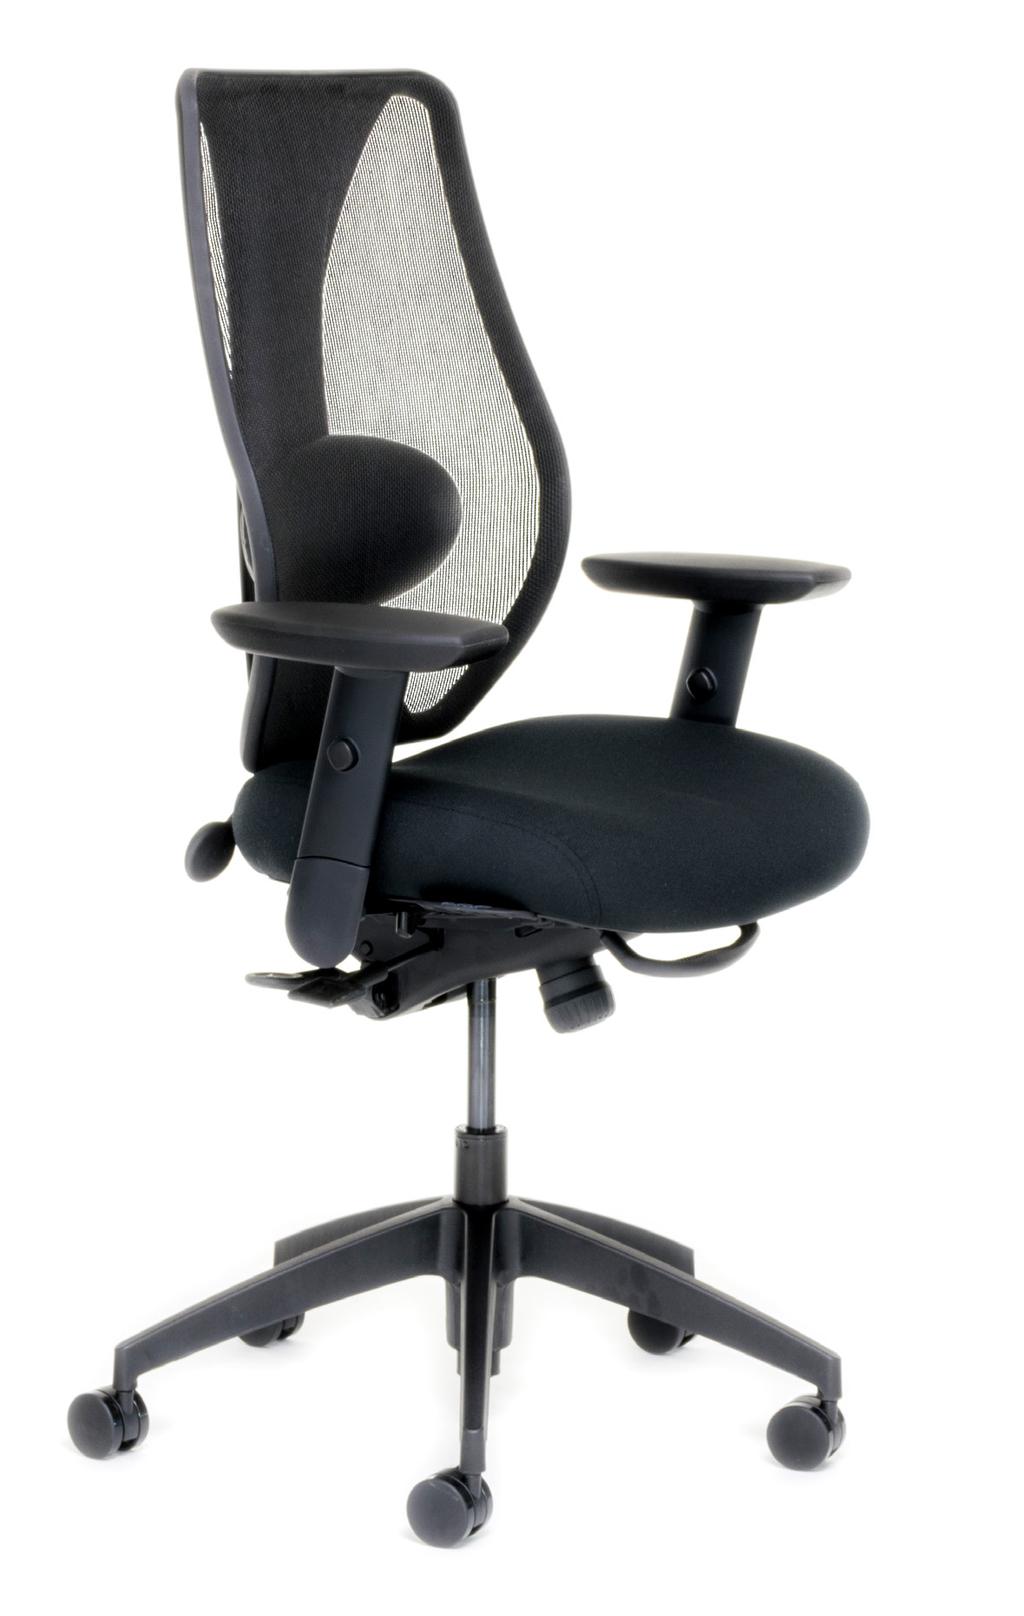 ergocentric tcentric Hybrid The tcentric features a dual curve backrest that provides excellent lateral and lumbar support.